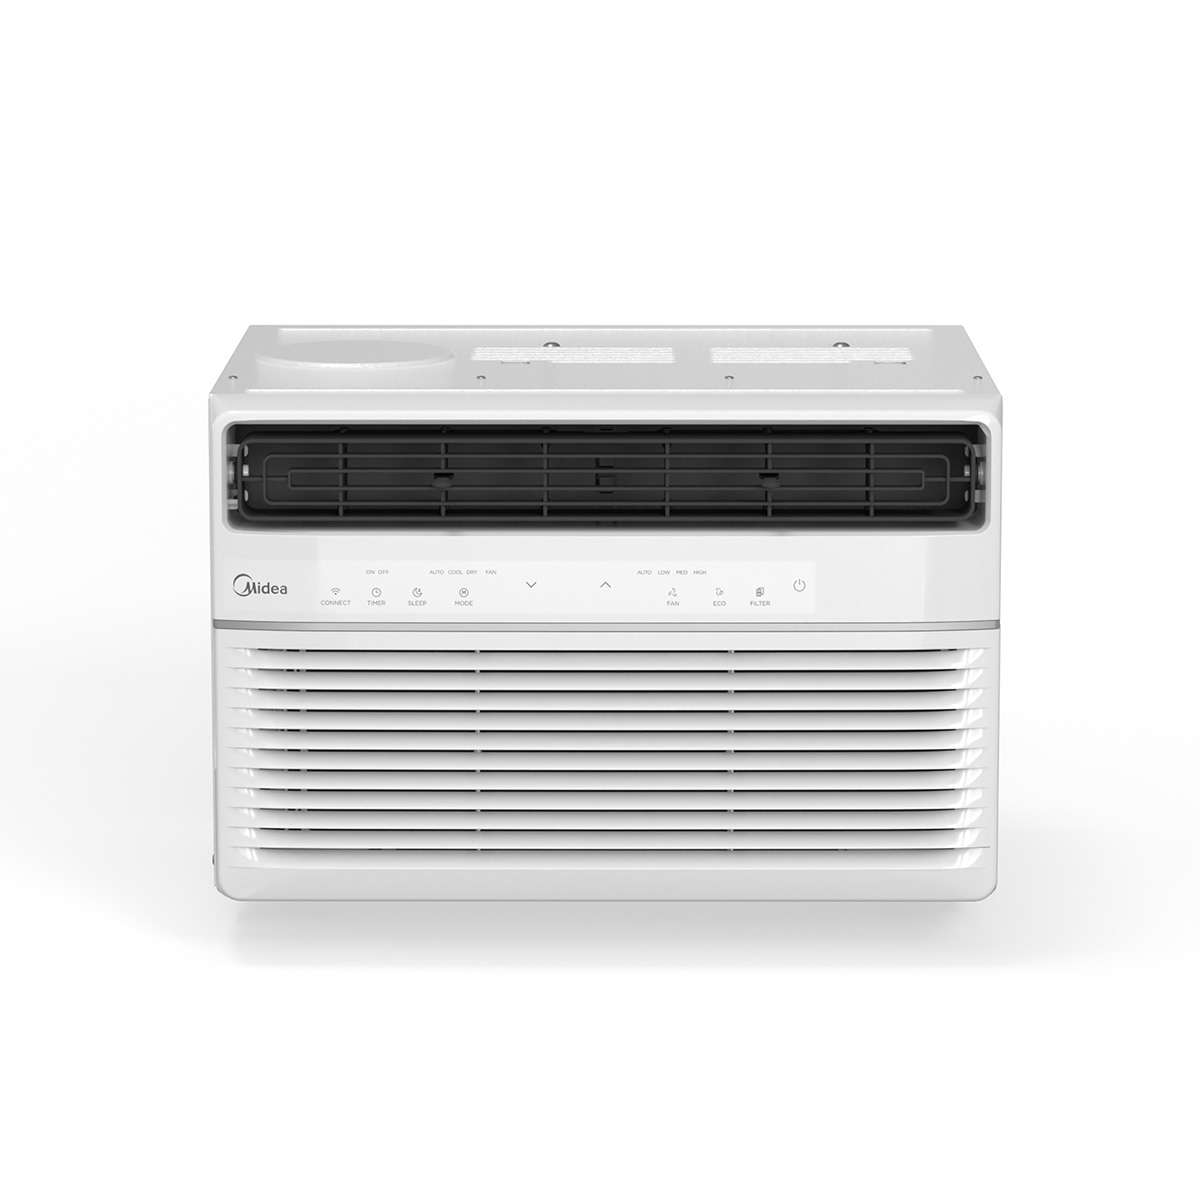 Midea 5,000 BTU Window AC, 3 -in-1 Cools, Dehumidifies and Ciculates, Washable Filter, Remote Control, up to 150 Sq. Ft.